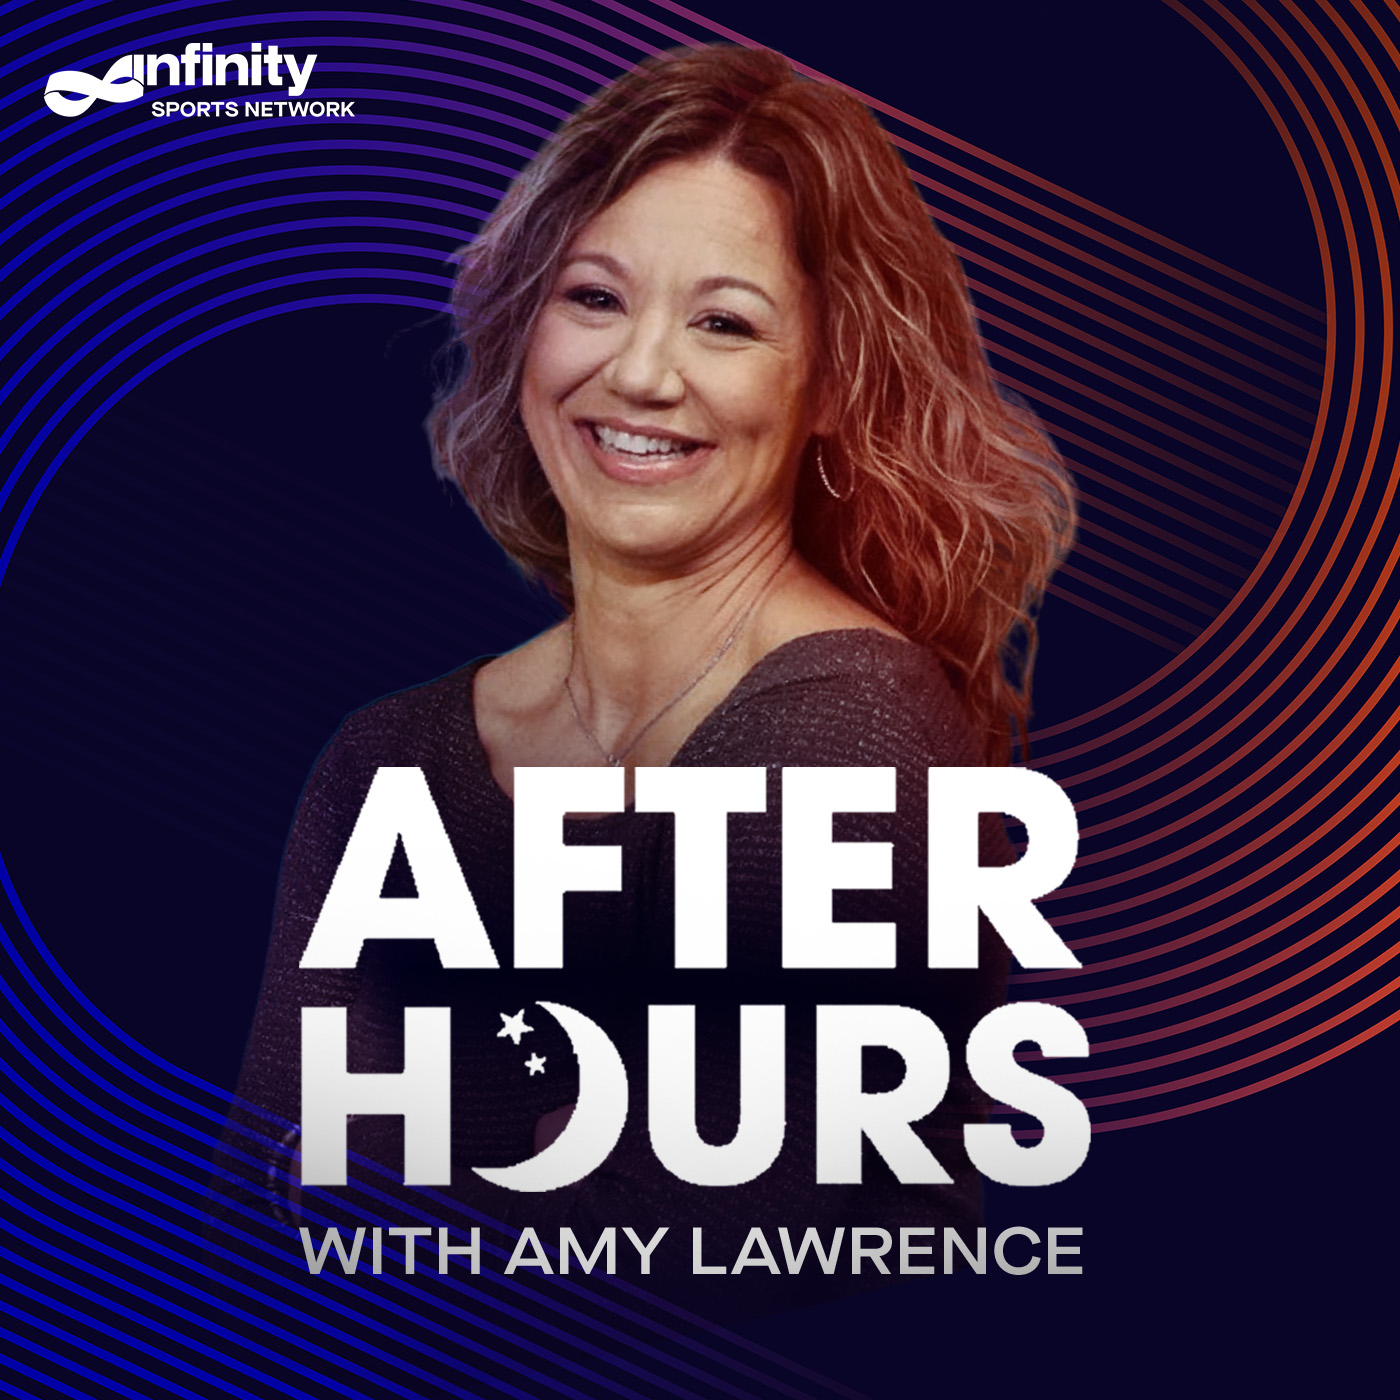 6/17/20 After Hours with Amy Lawrence PODCAST: Hour 4